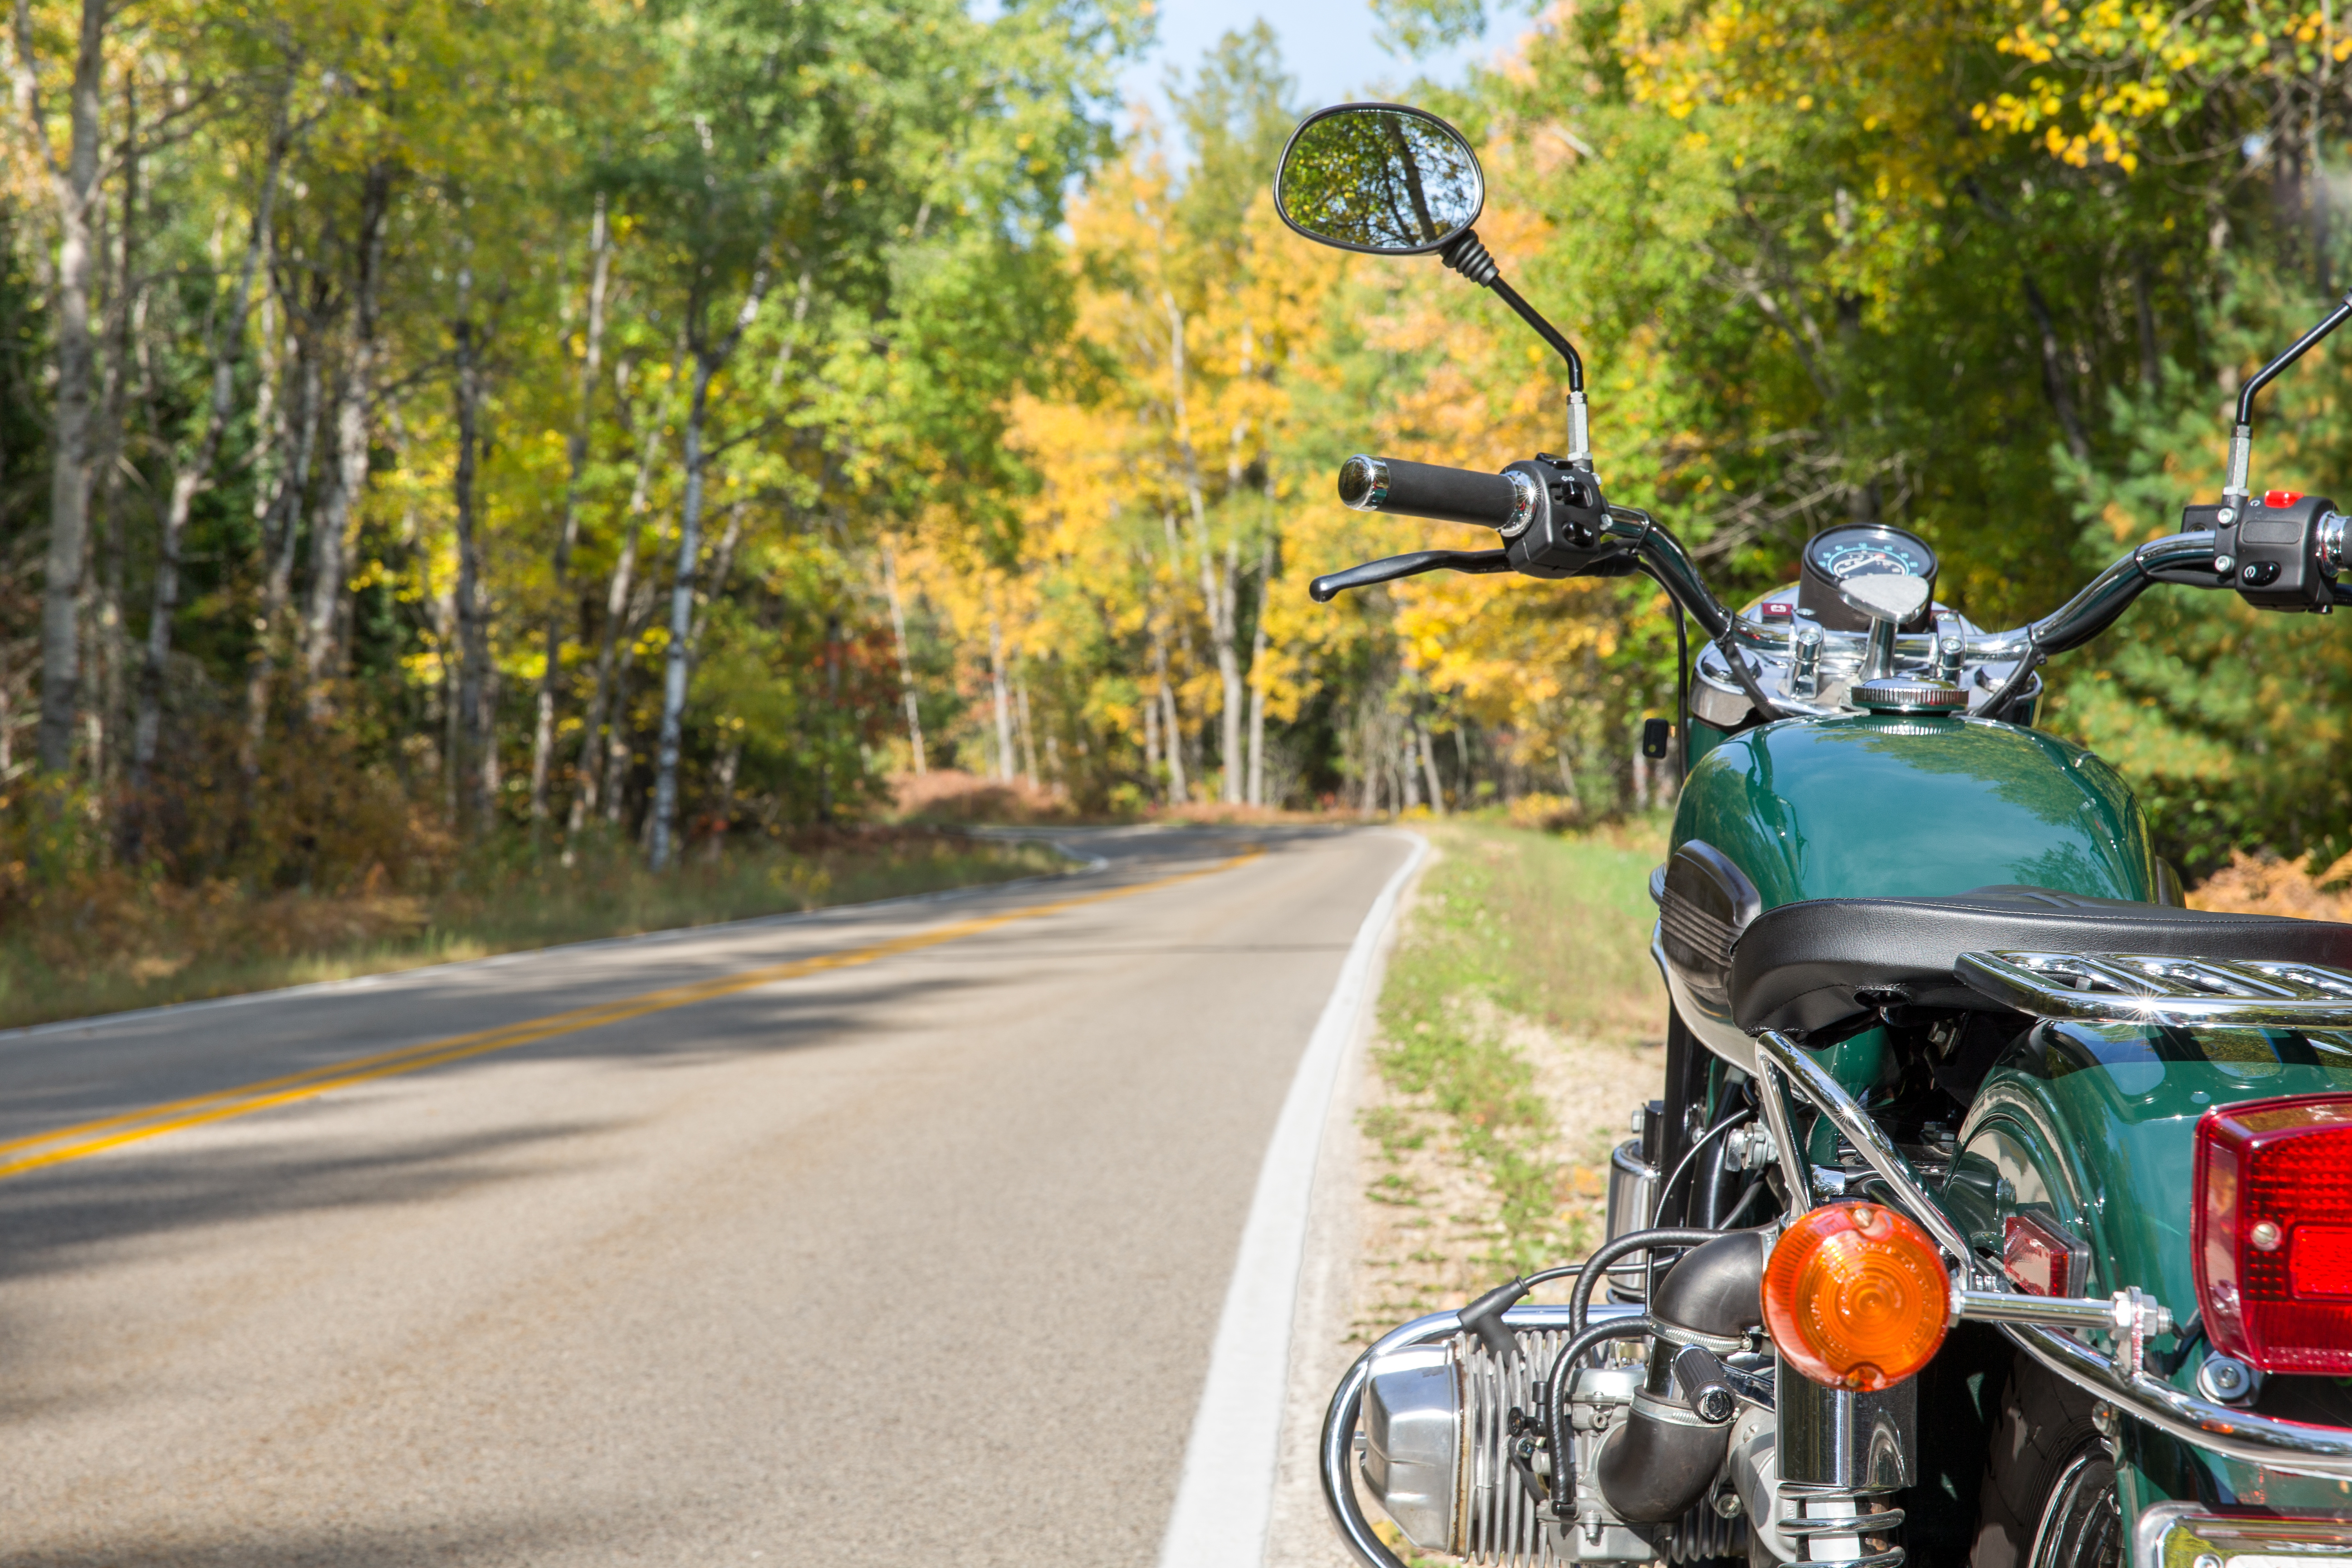 A green motorcycle alongside a curving open road in the Fall.  Selective focus on motorcycle with copy space in left frame if needed.  Ready for adventure.